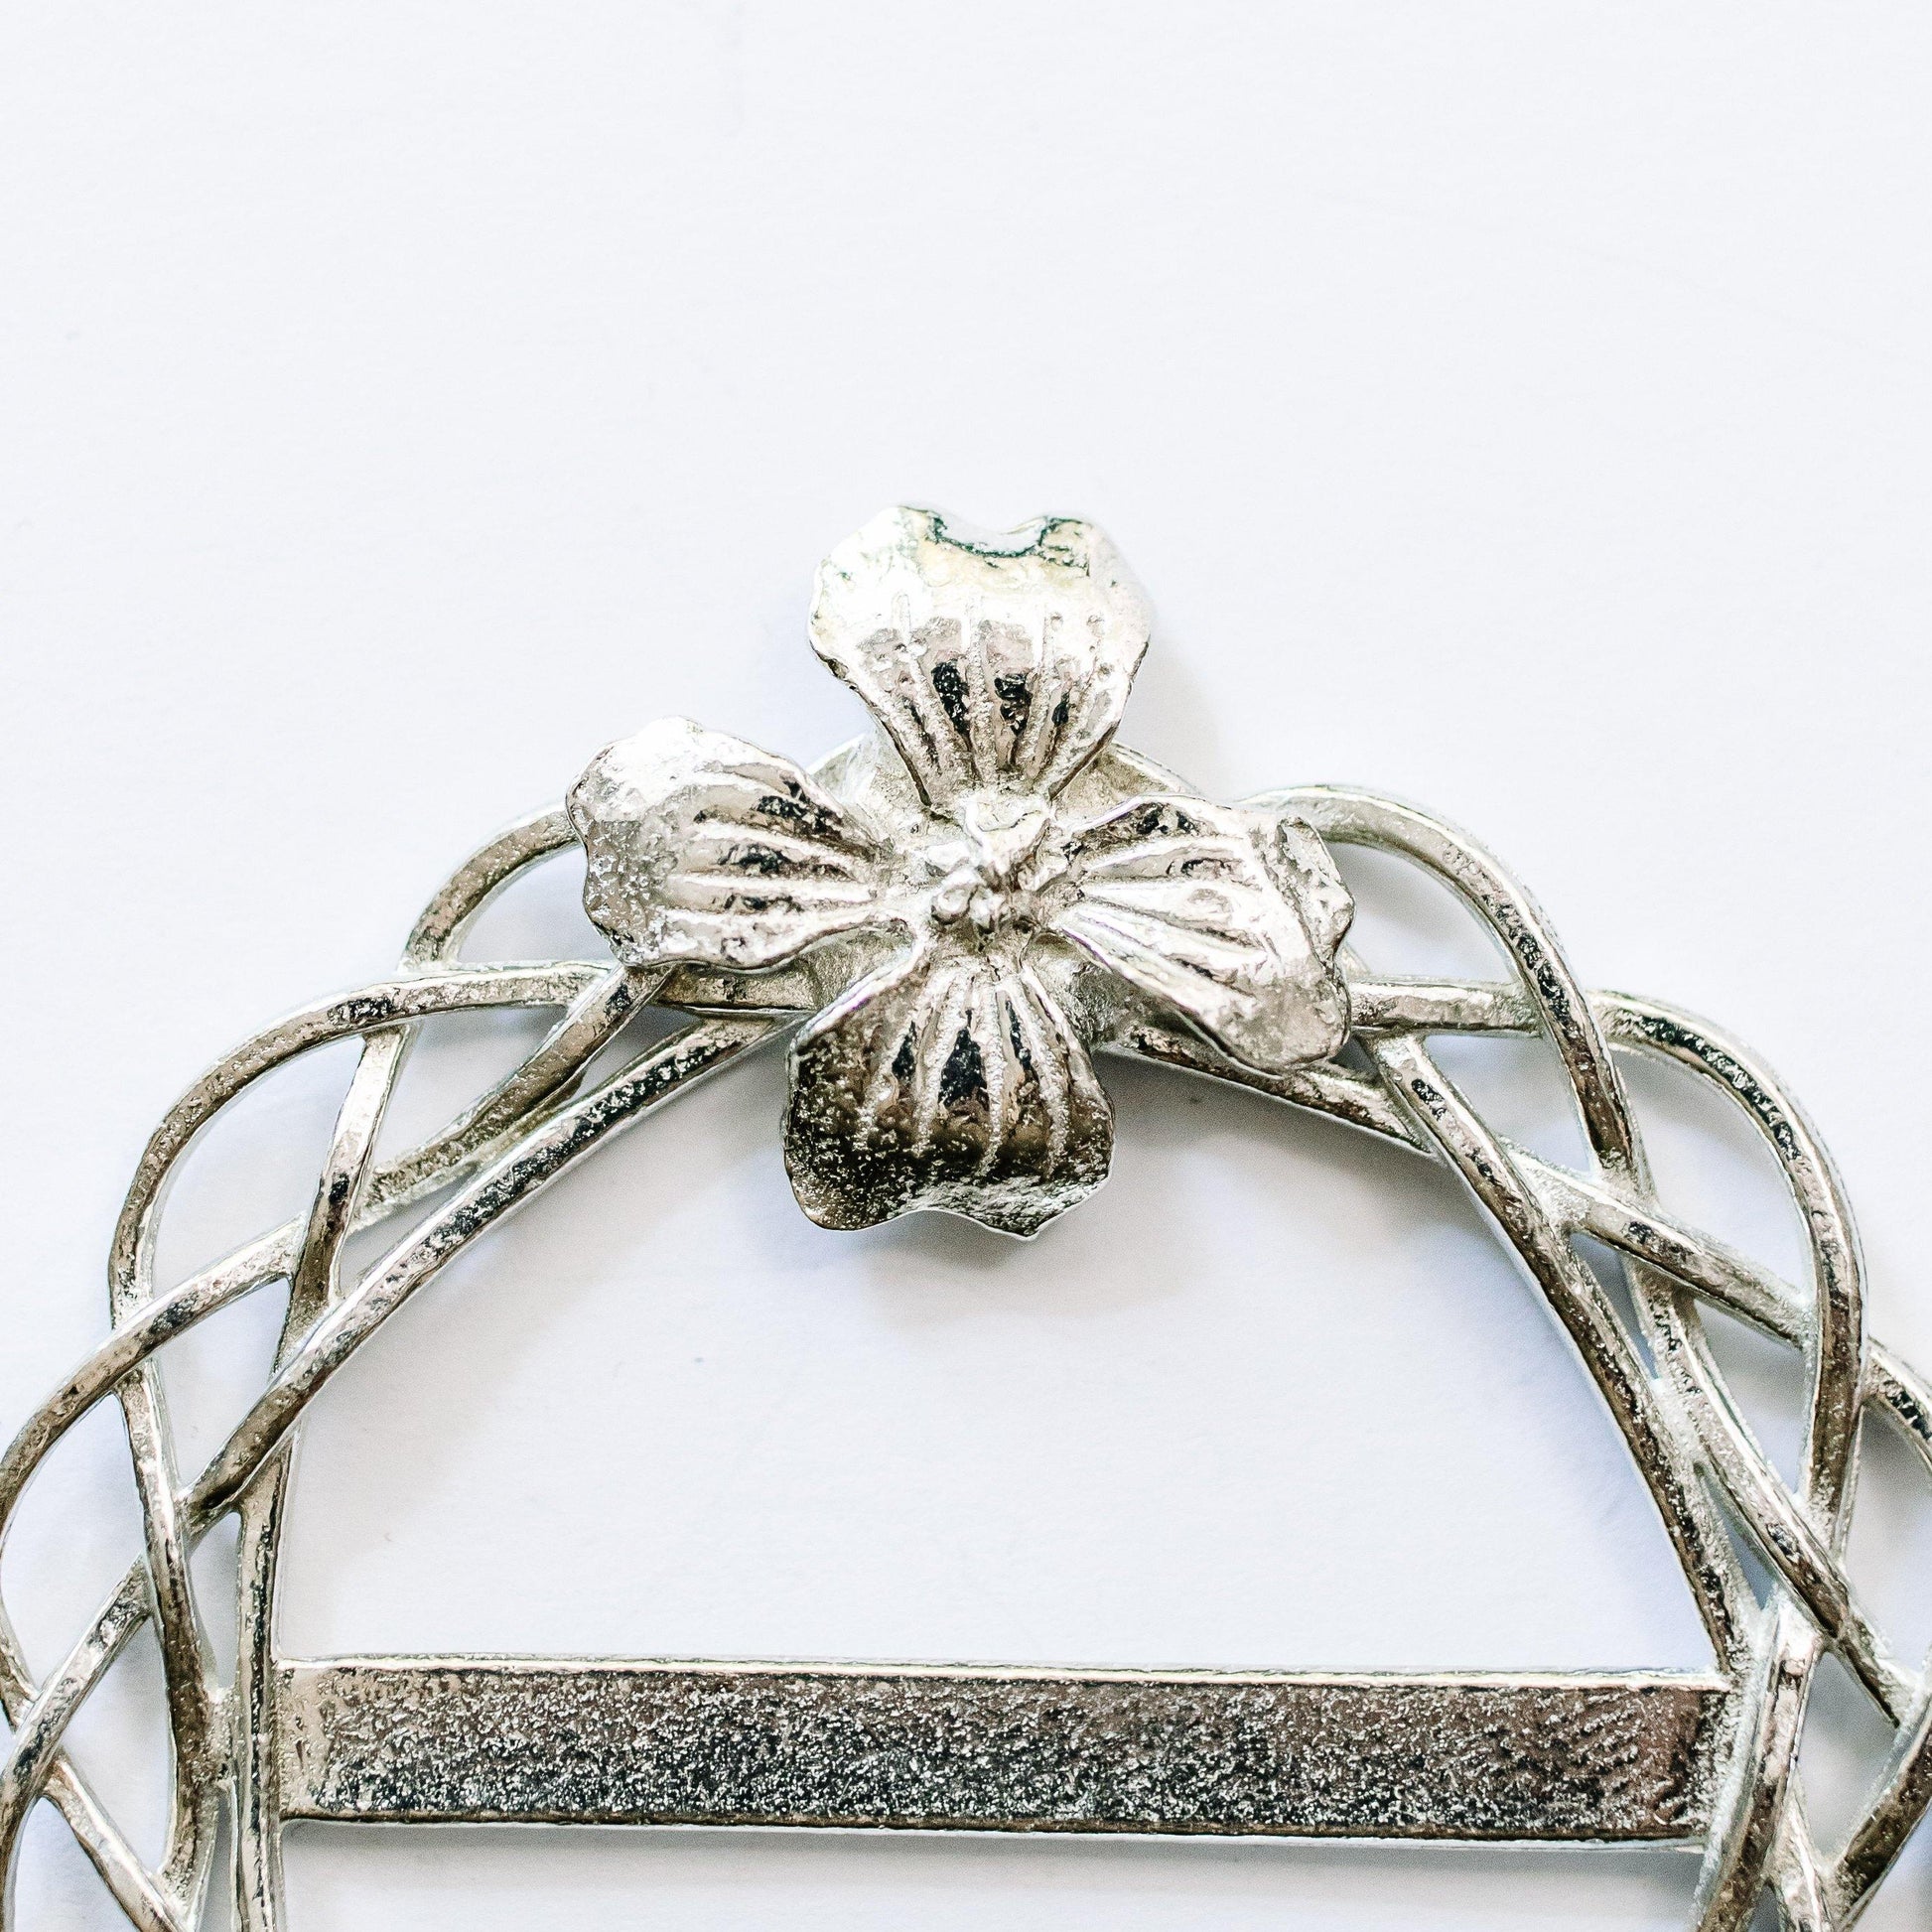 Handmade Pewter Dogwood Flower Scarf Ring Jewelry Women Accessory - House of Morgan Pewter